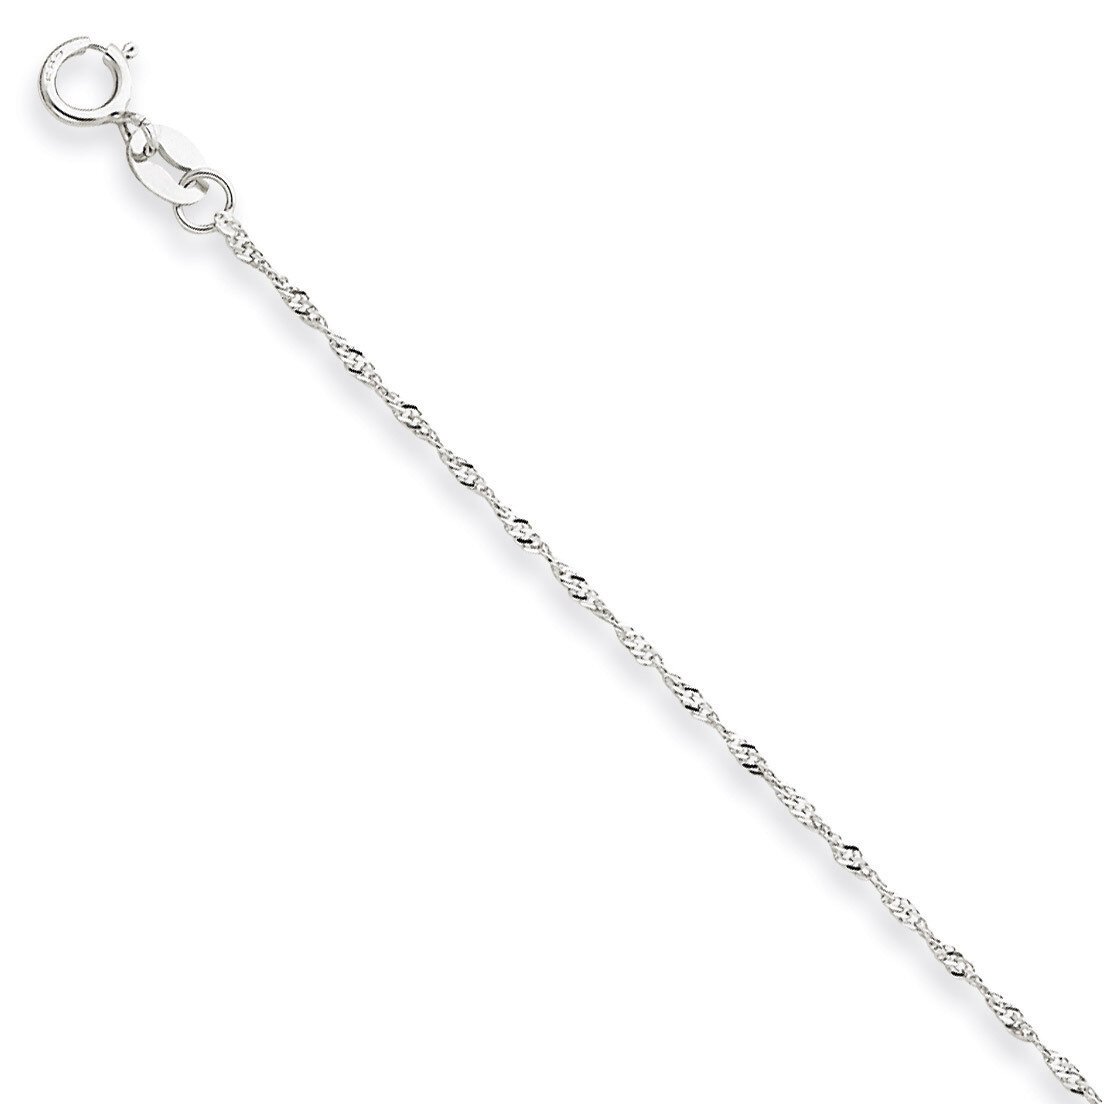 1mm Singapore Chain (CARDED) 16 Inch 14k White Gold 10SW-16